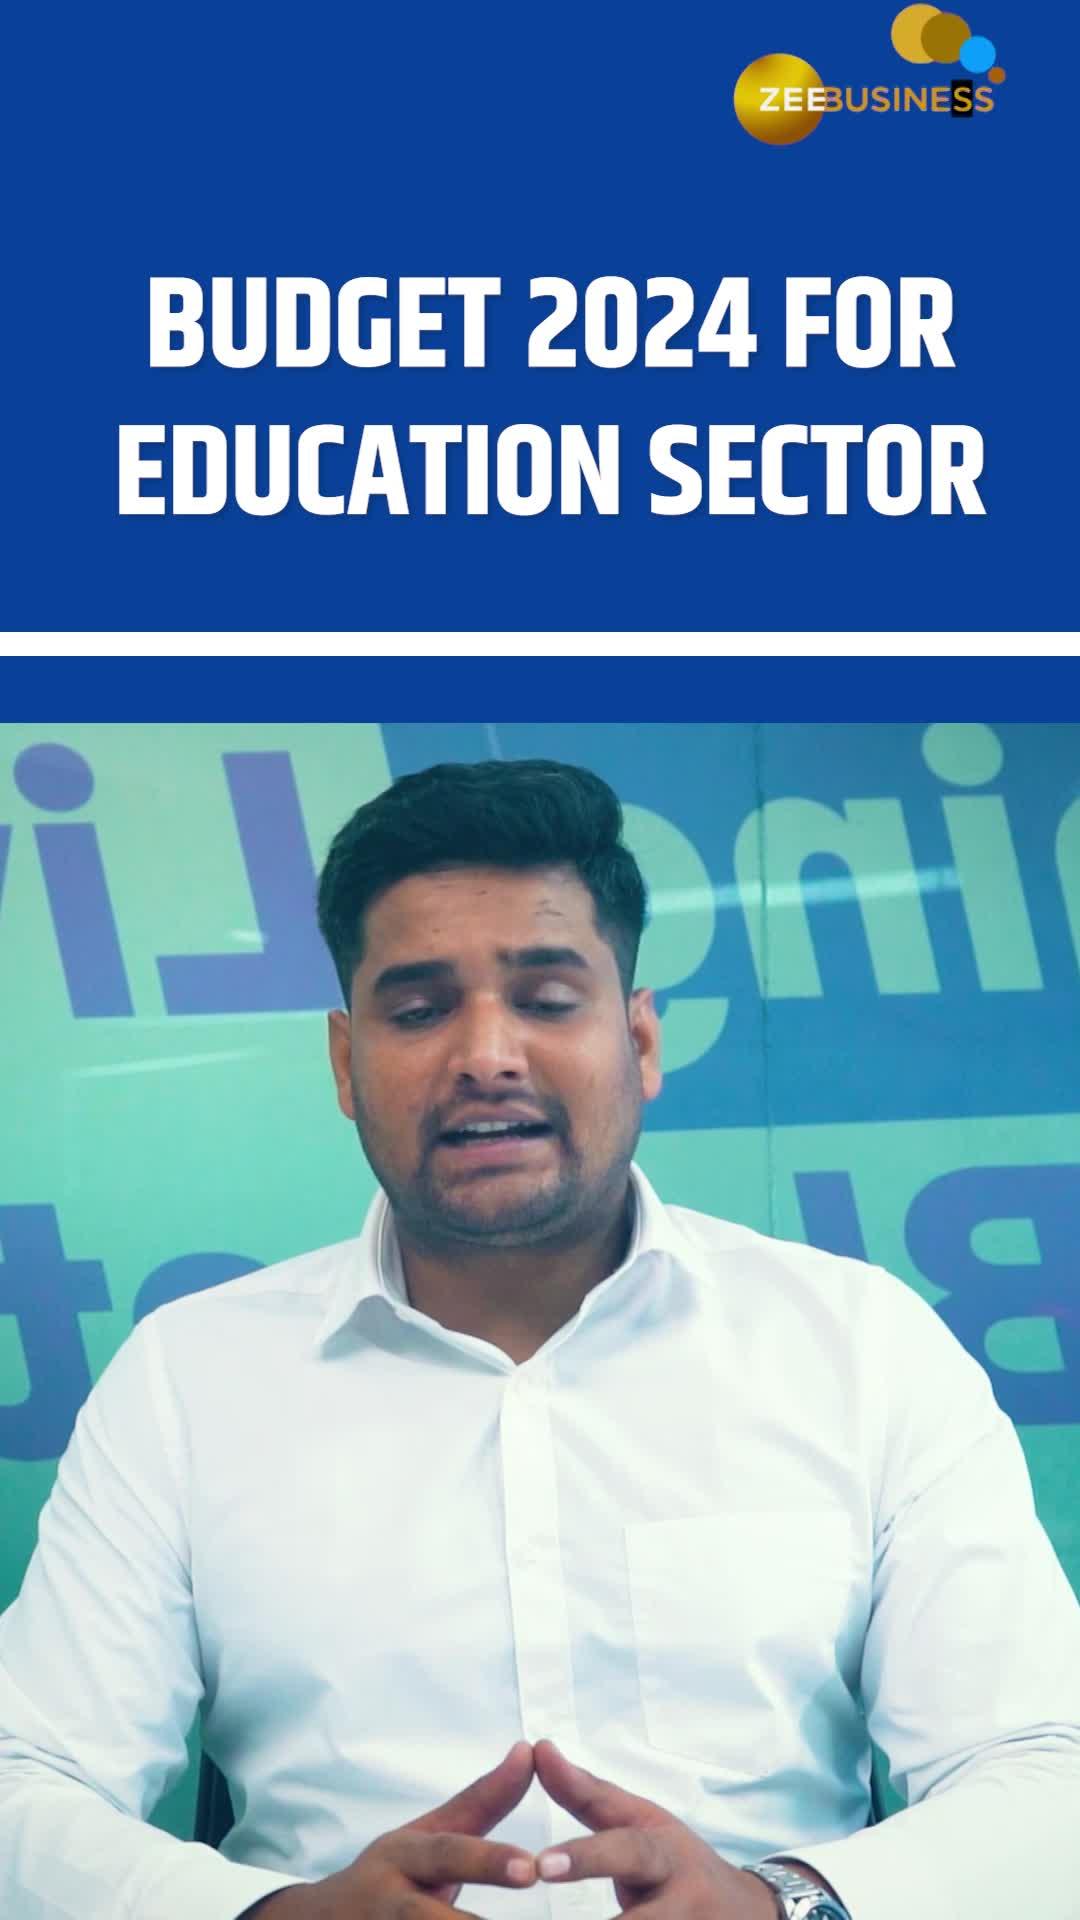 Expectation from Budget 2024 for Education sector #budget2024 #economicsurvey #zeebusiness 